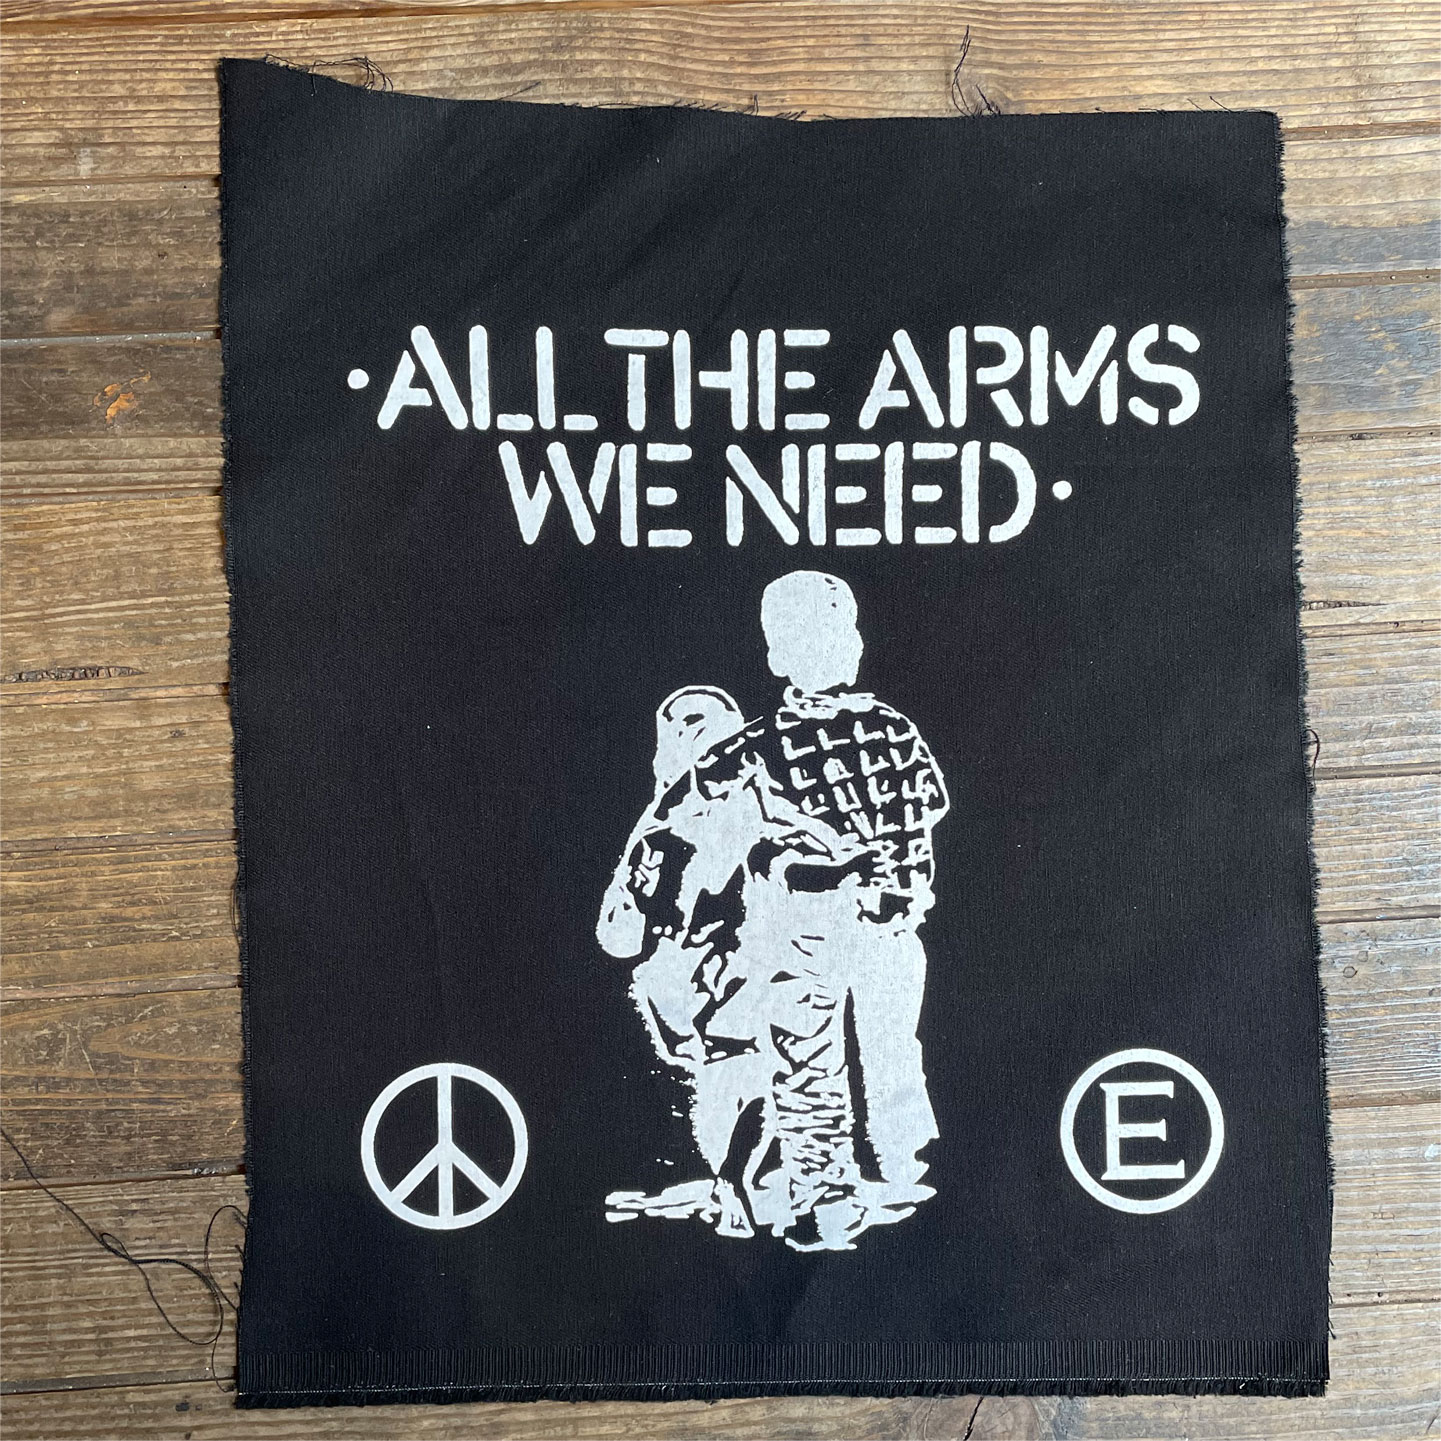 FLUX OF PINK INDIANS BACKPATCH ALL THE ARMS WE NEED